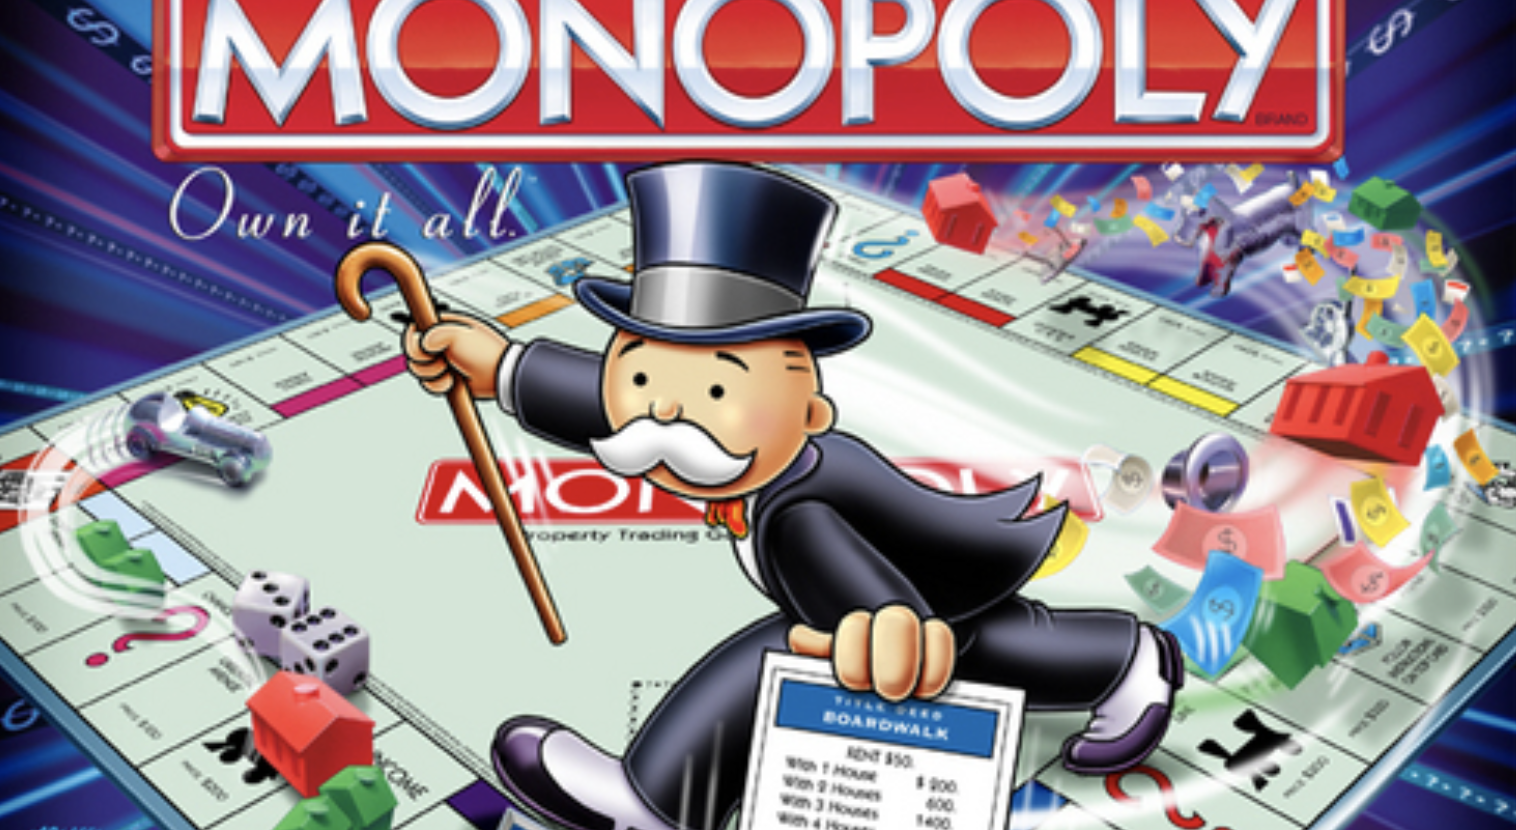 Monopoly Game Playing Board